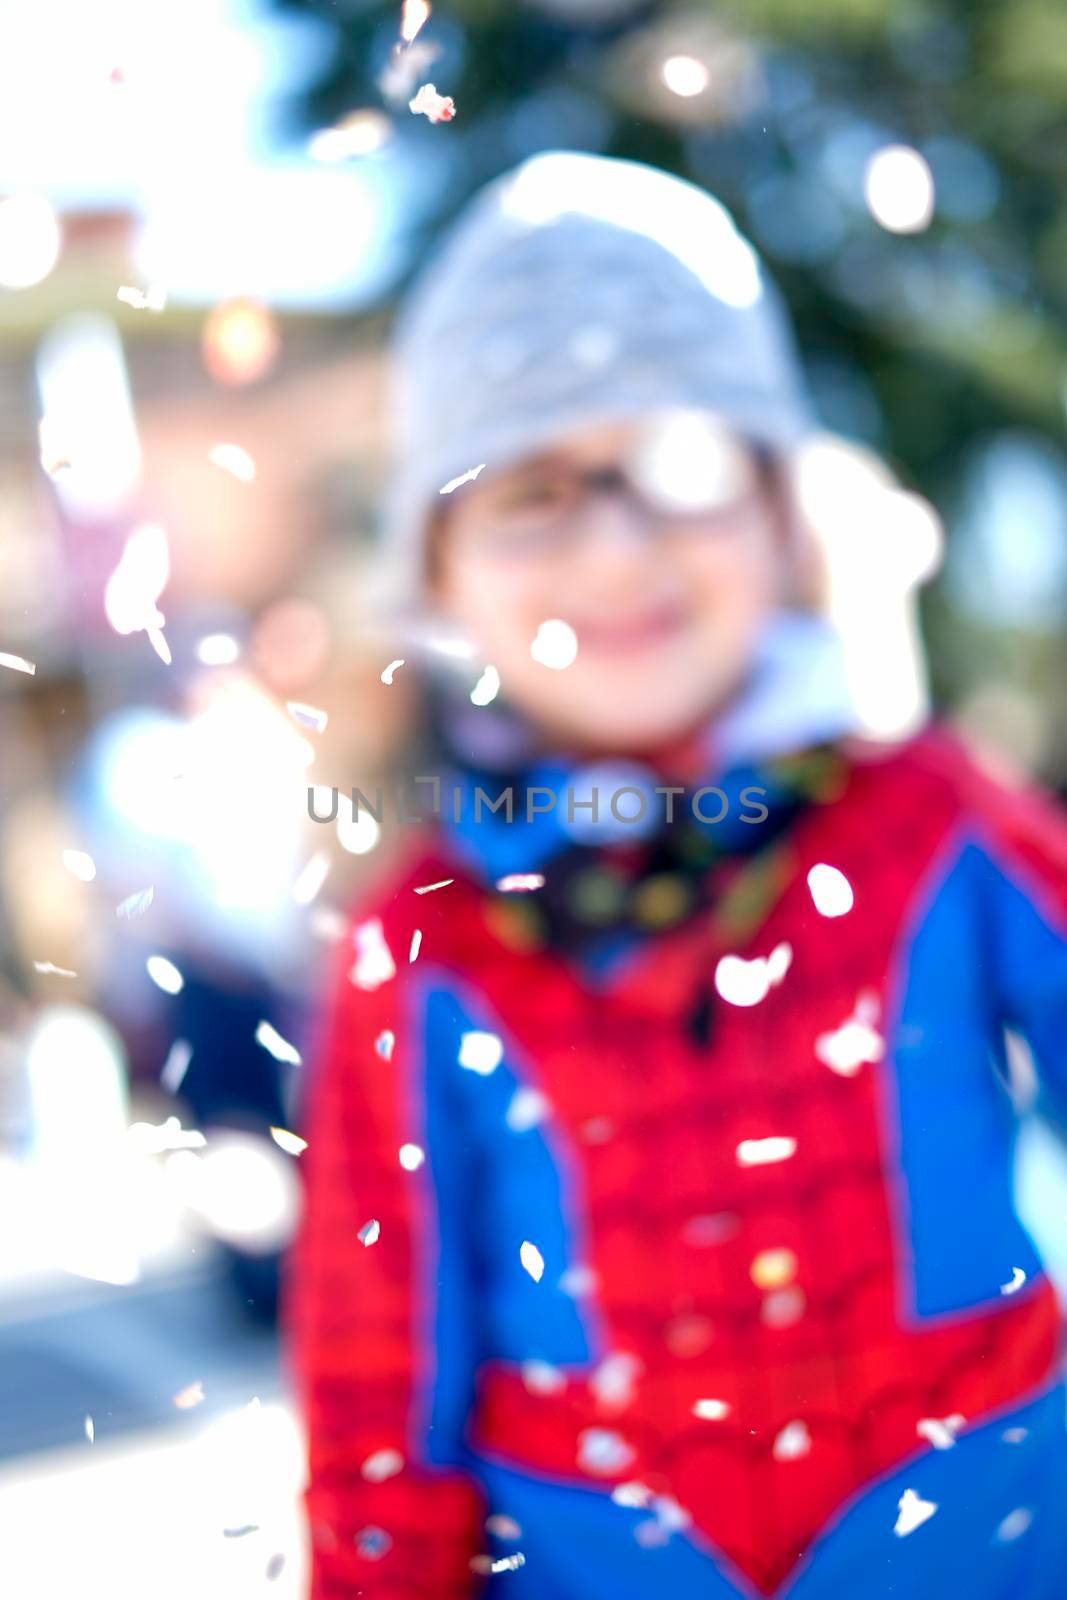 beautiful child with red spider superhero costume playing with confetti. High quality photo